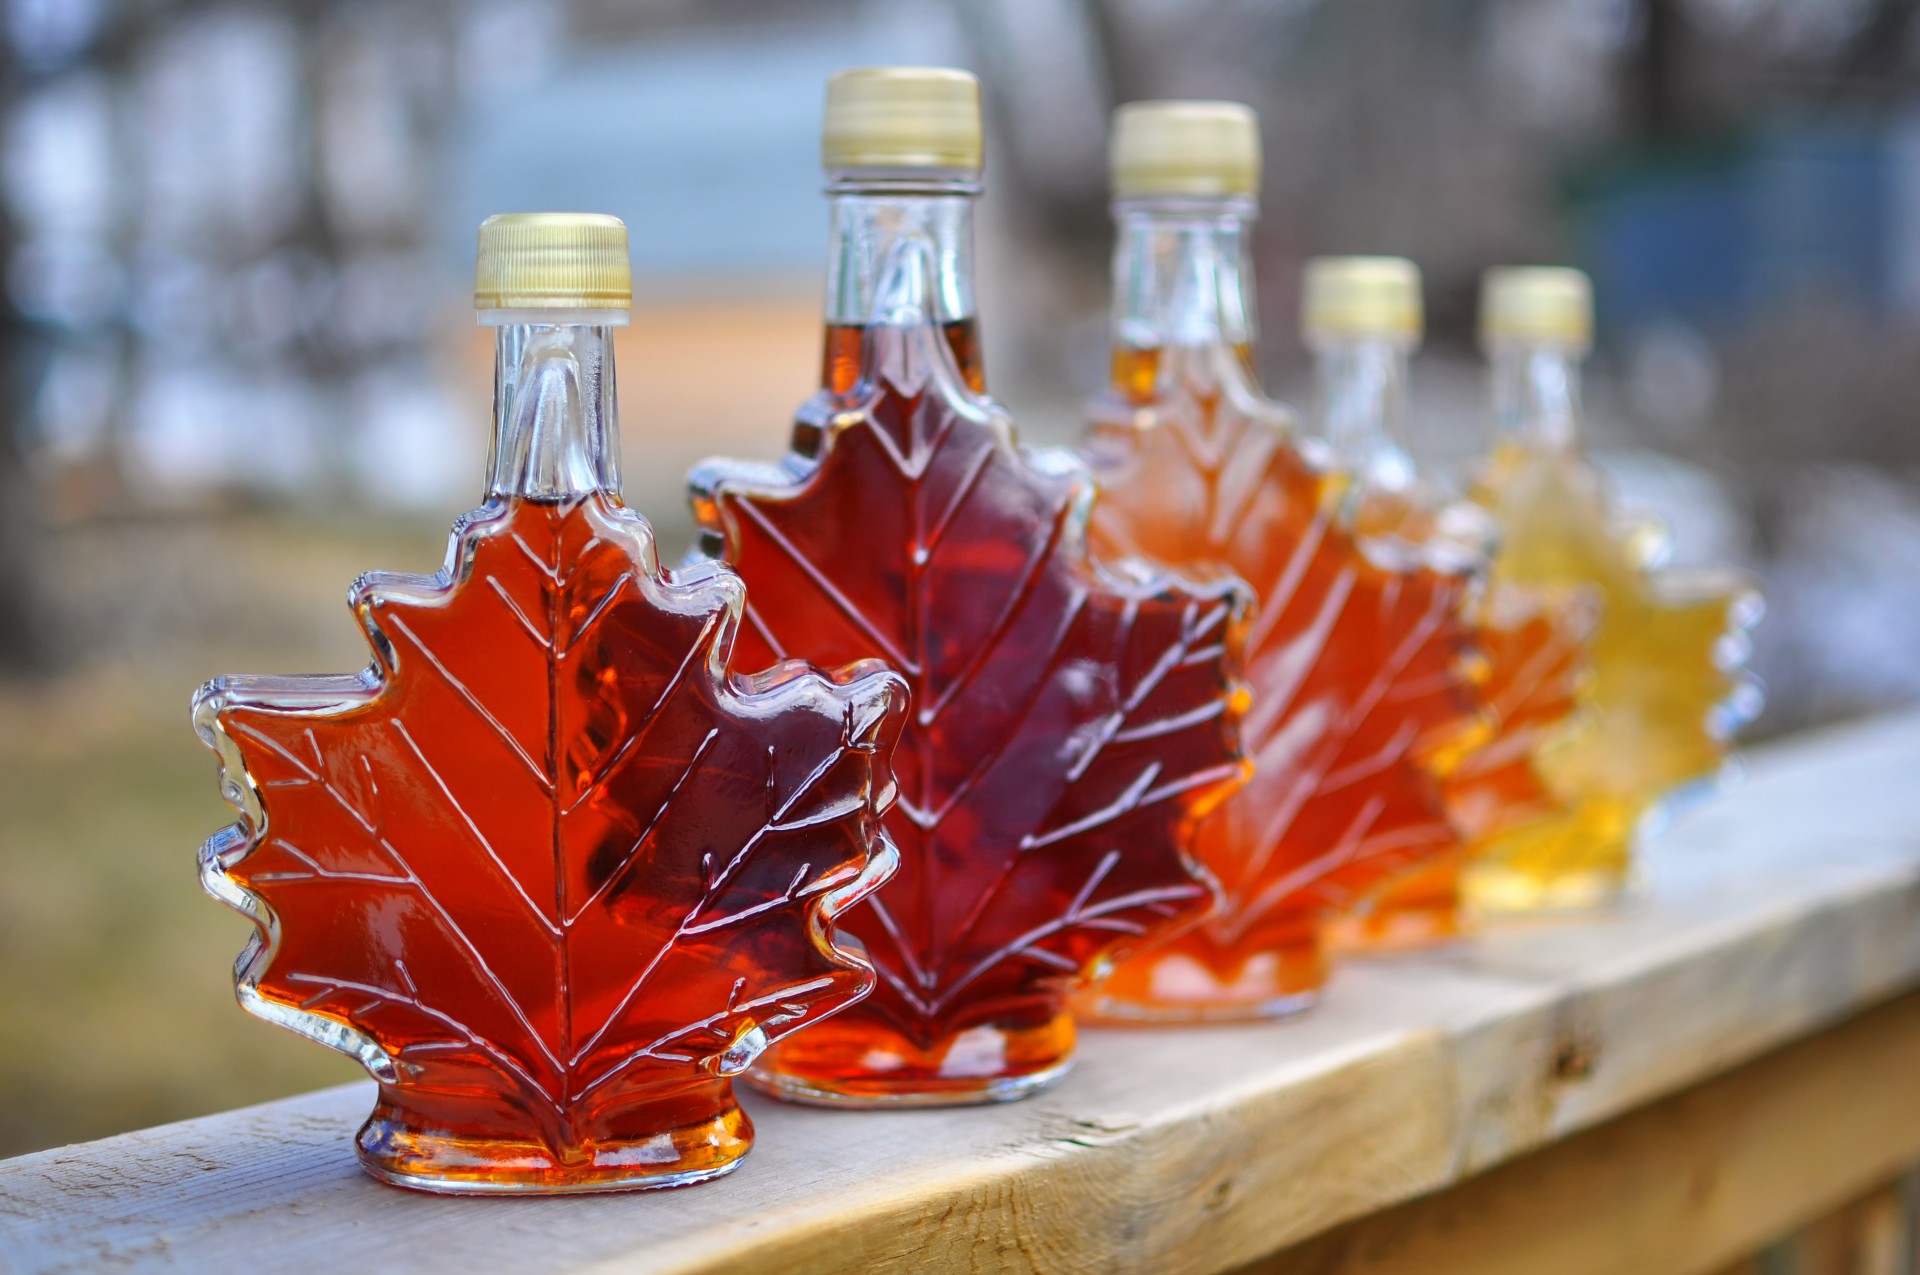 It’s syrup season Here’s our list of the musttry maple syrup